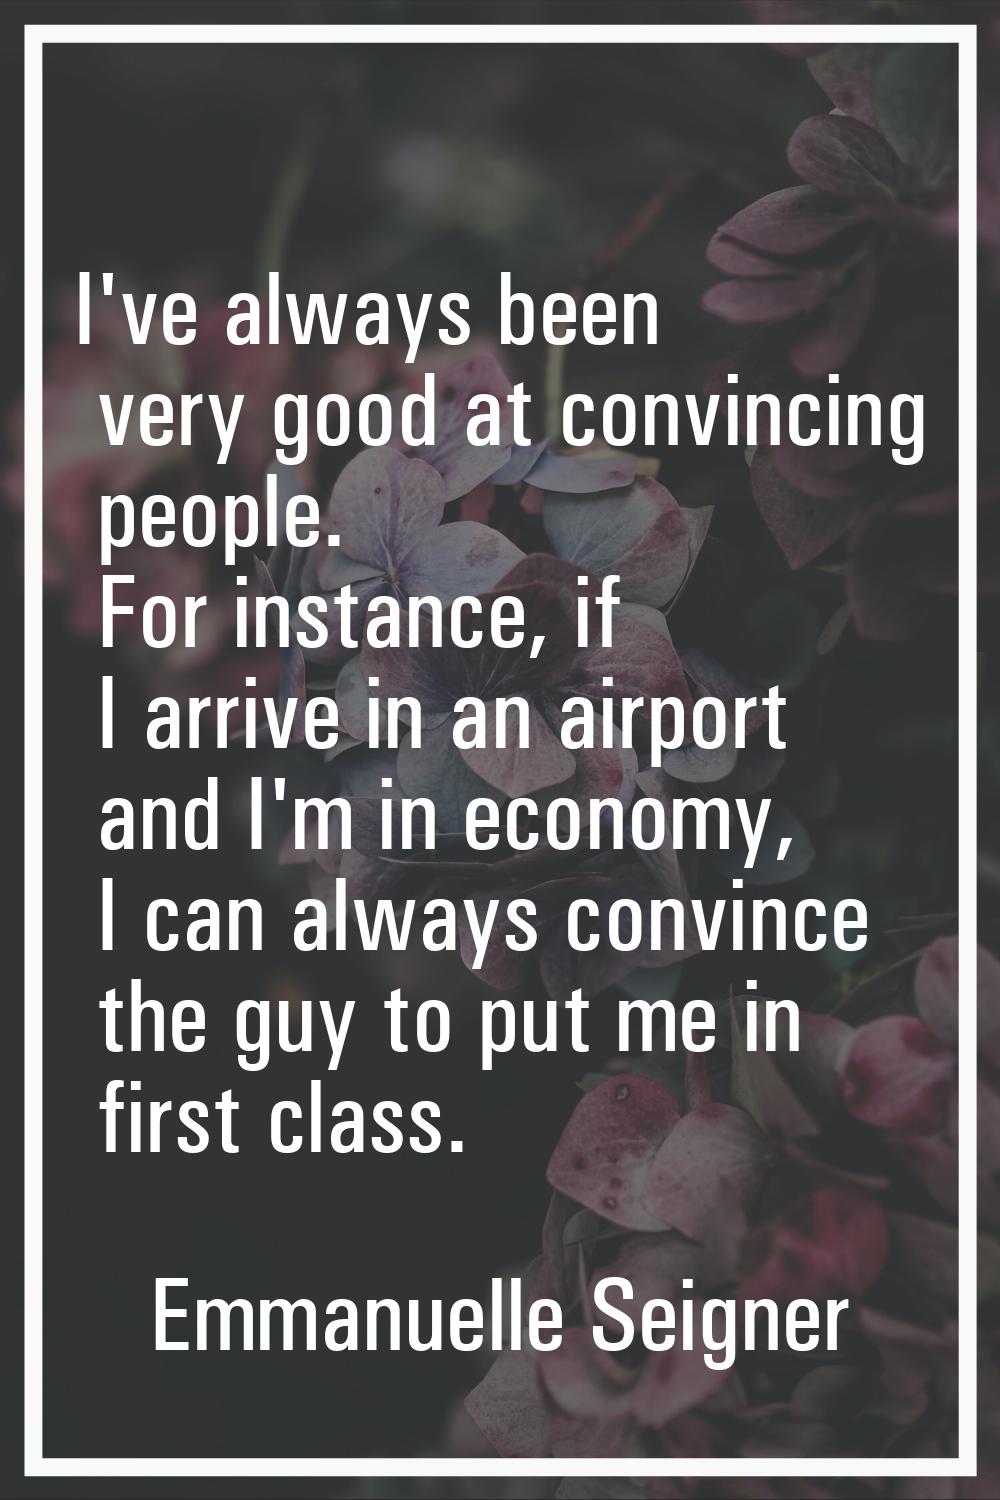 I've always been very good at convincing people. For instance, if I arrive in an airport and I'm in